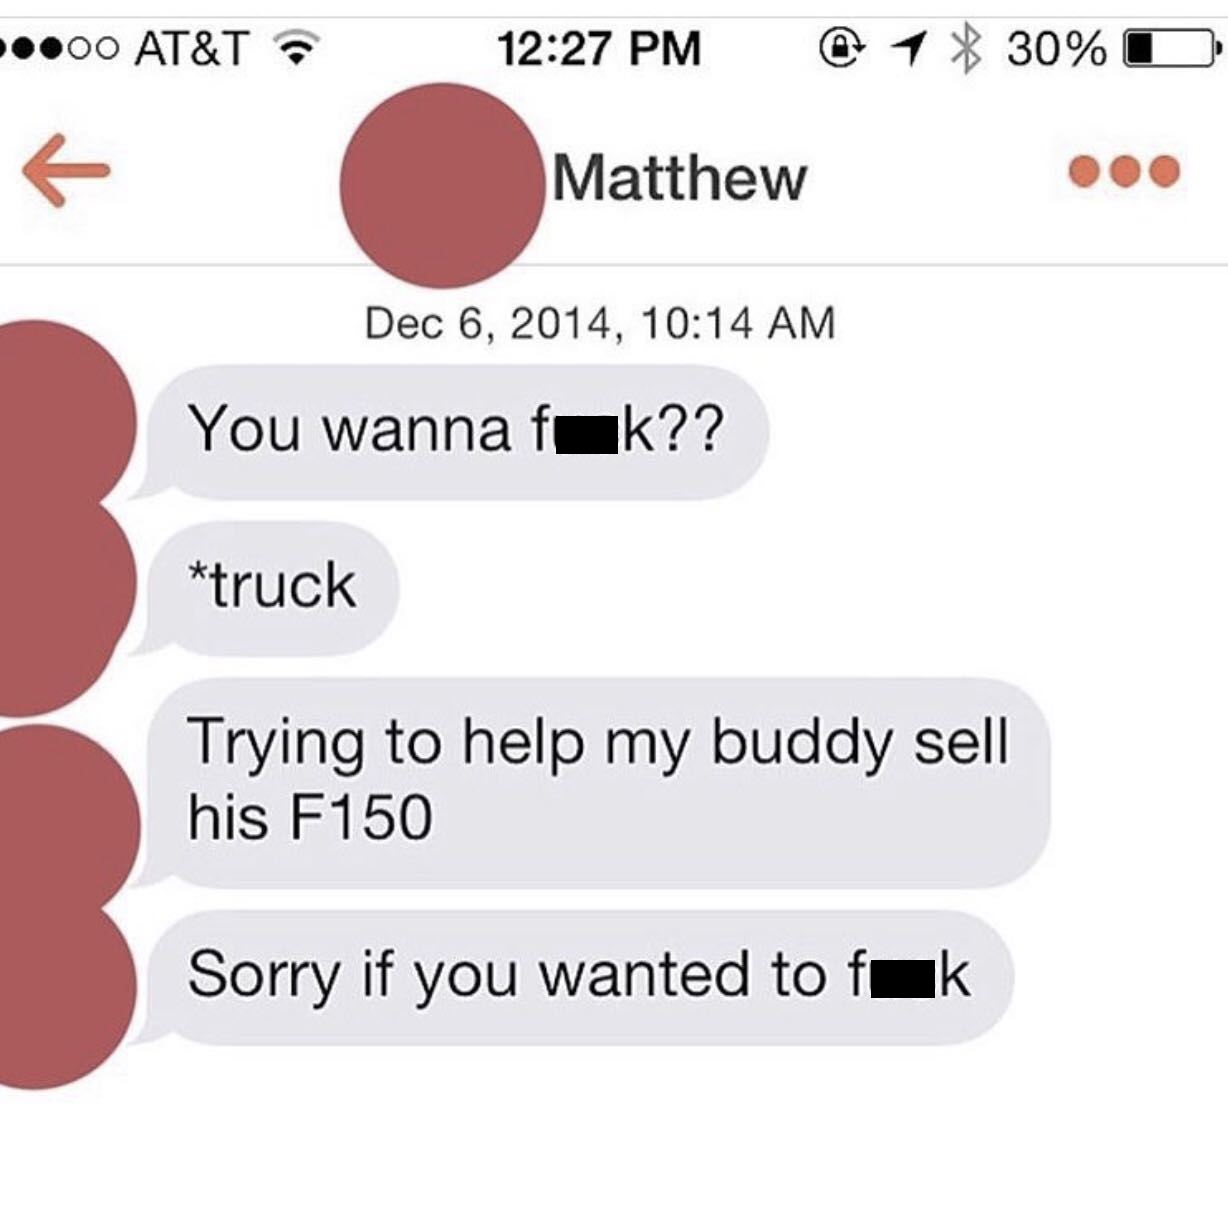 you wanna fuck truck - .00 At&T @ 1 30%O Matthew , You wanna fak?? truck Trying to help my buddy sell his F150 Sorry if you wanted to fak